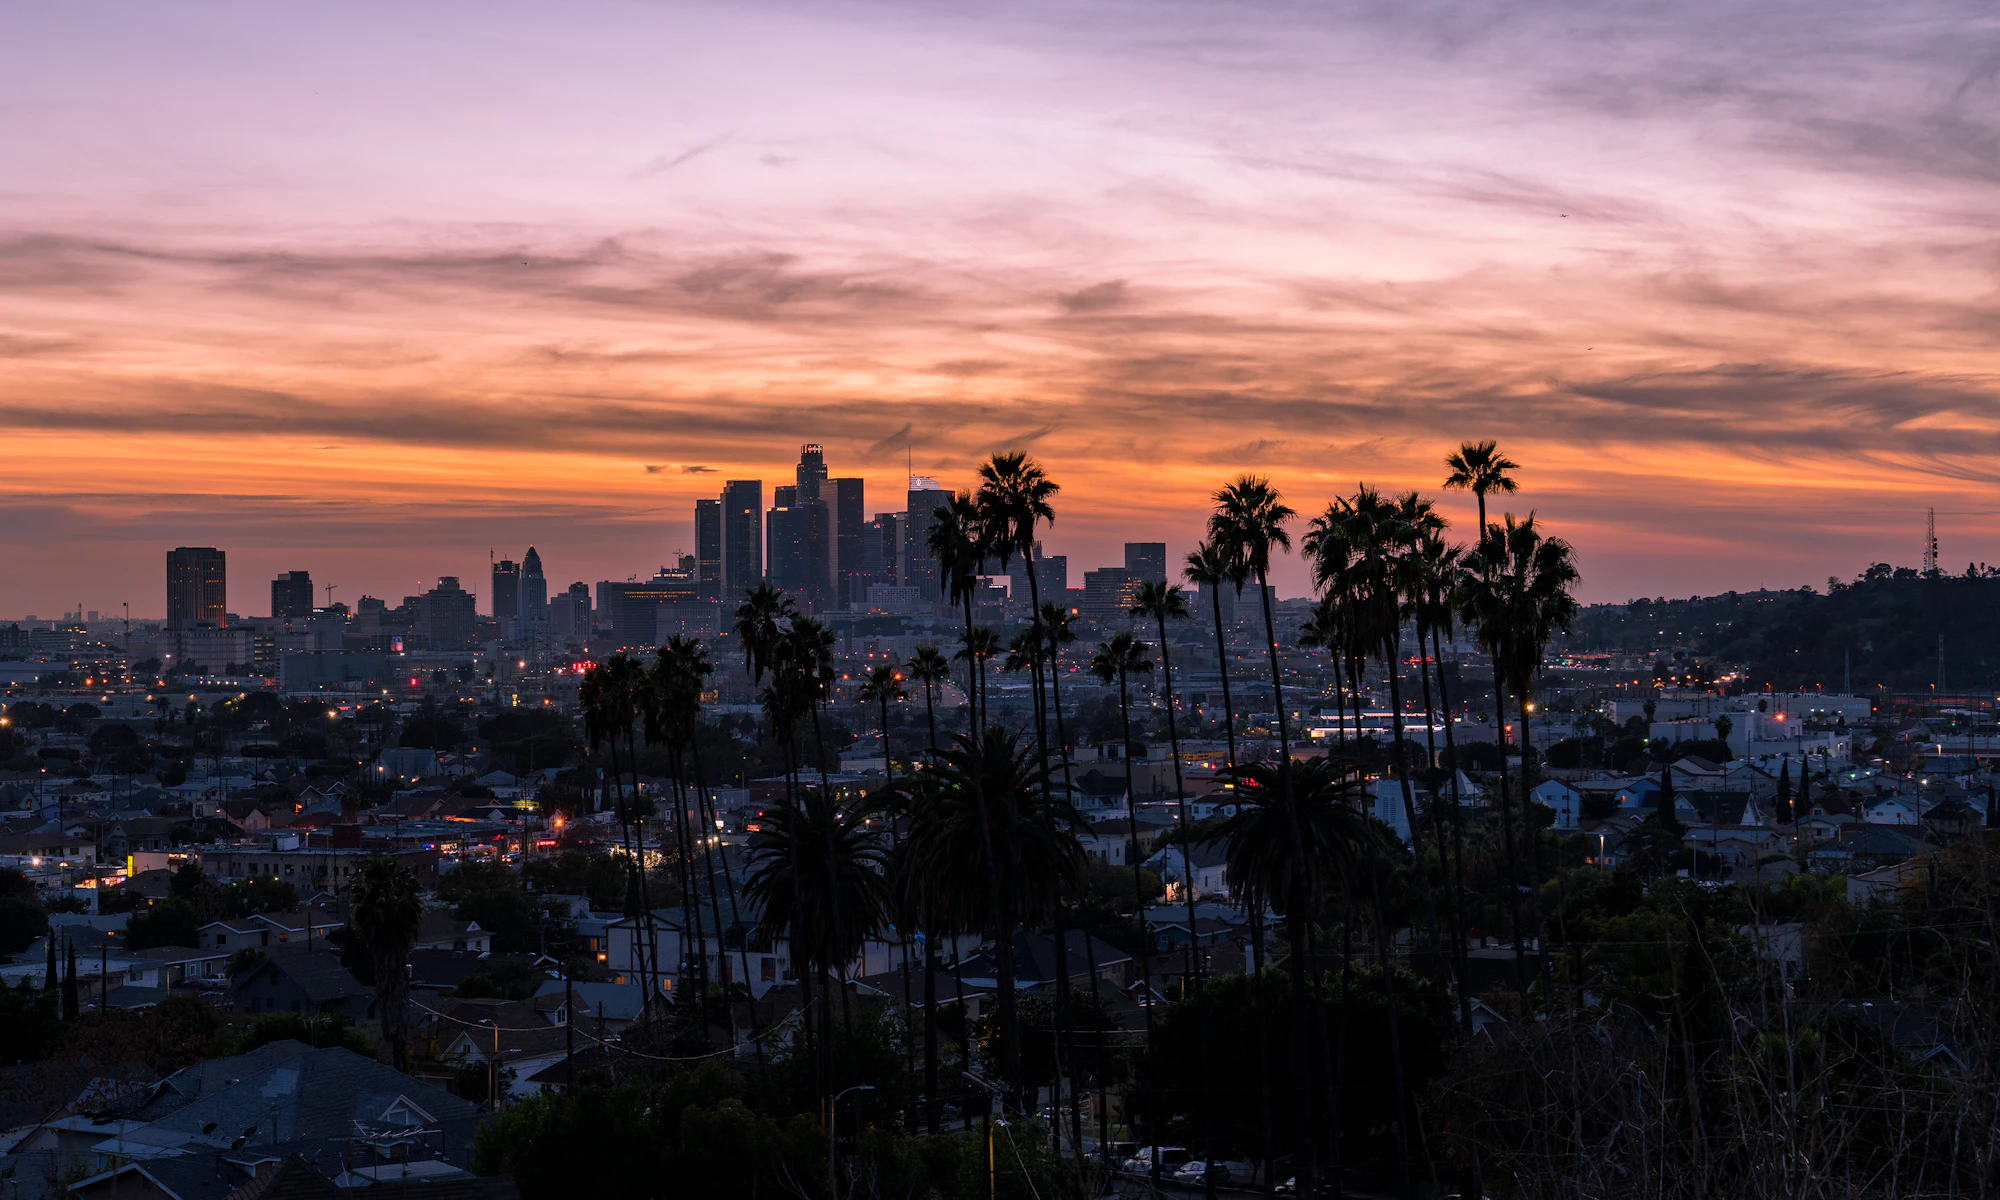 Flight Deal: $100 Multiple Cities to California Roundtrip